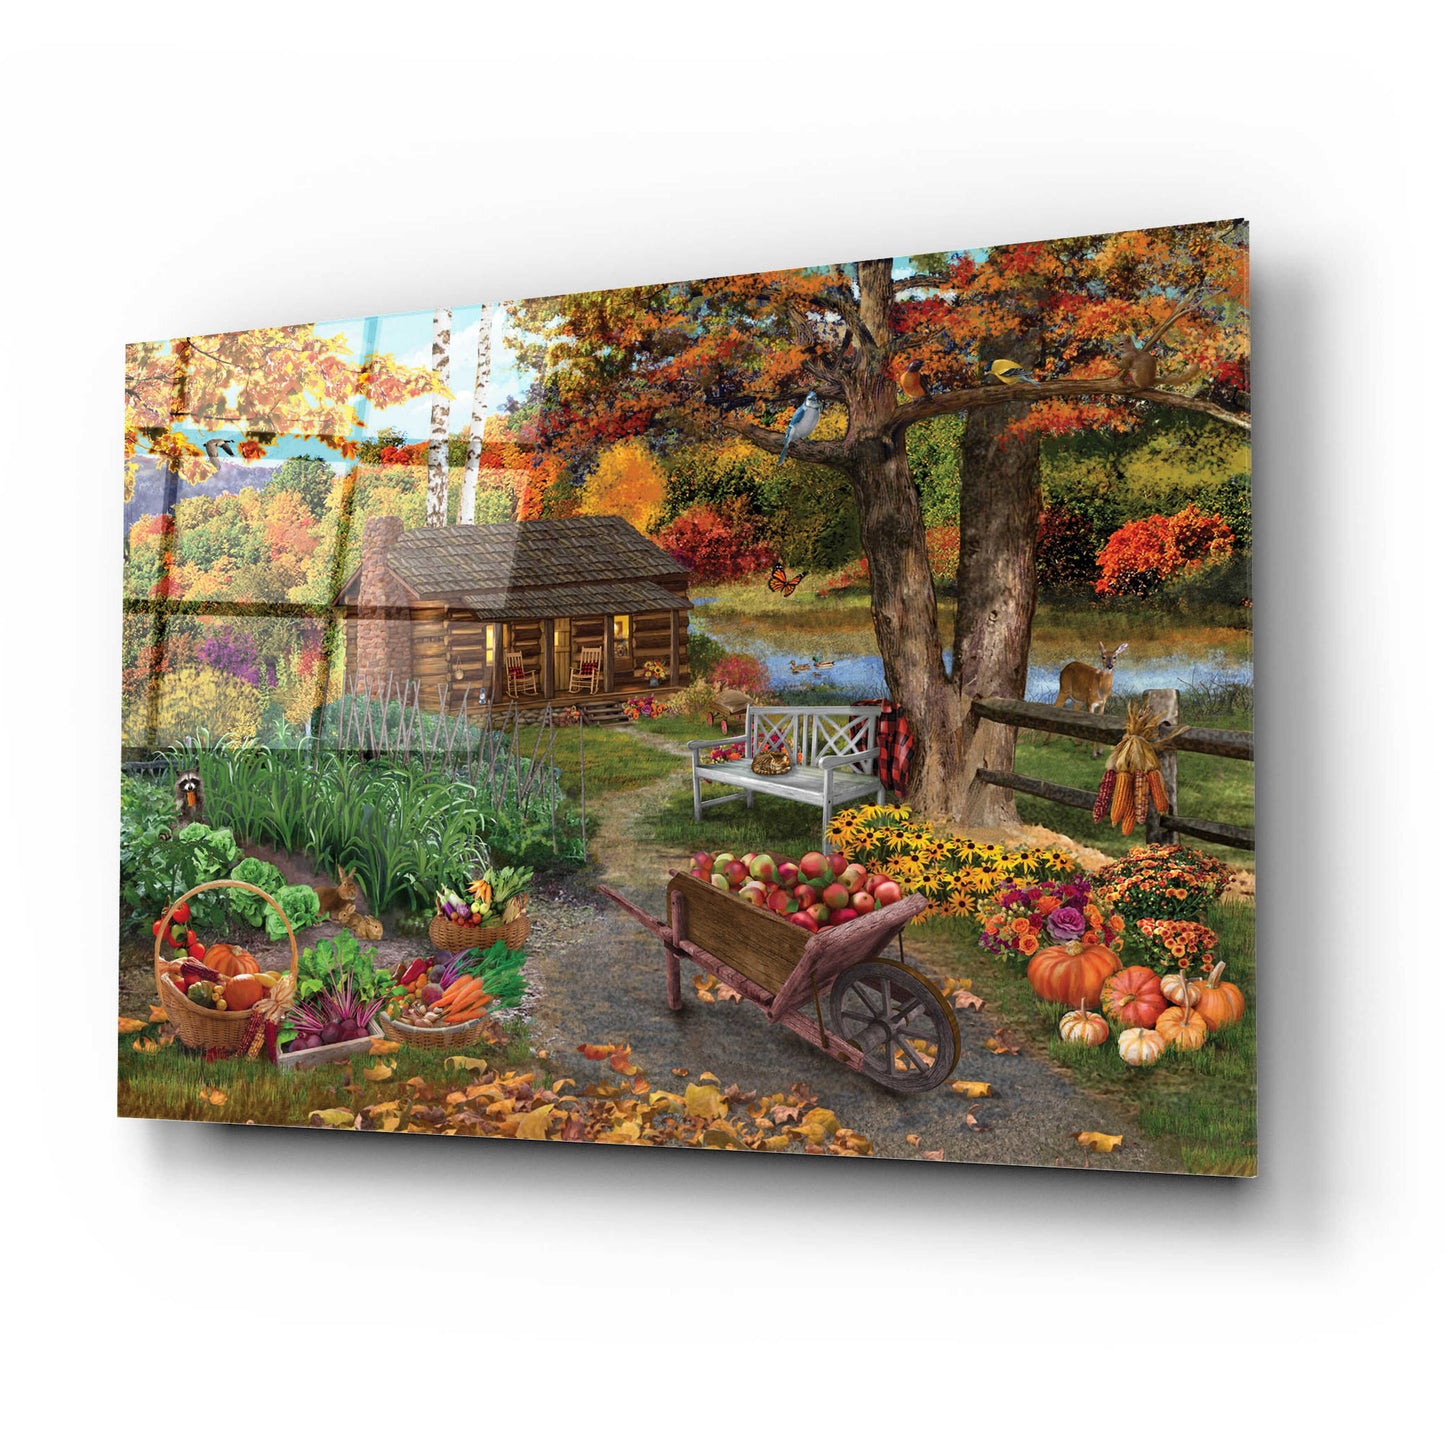 Epic Art 'Harvest at the Cabin' by Bigelow Illustrations, Acrylic Glass Wall Art,24x16